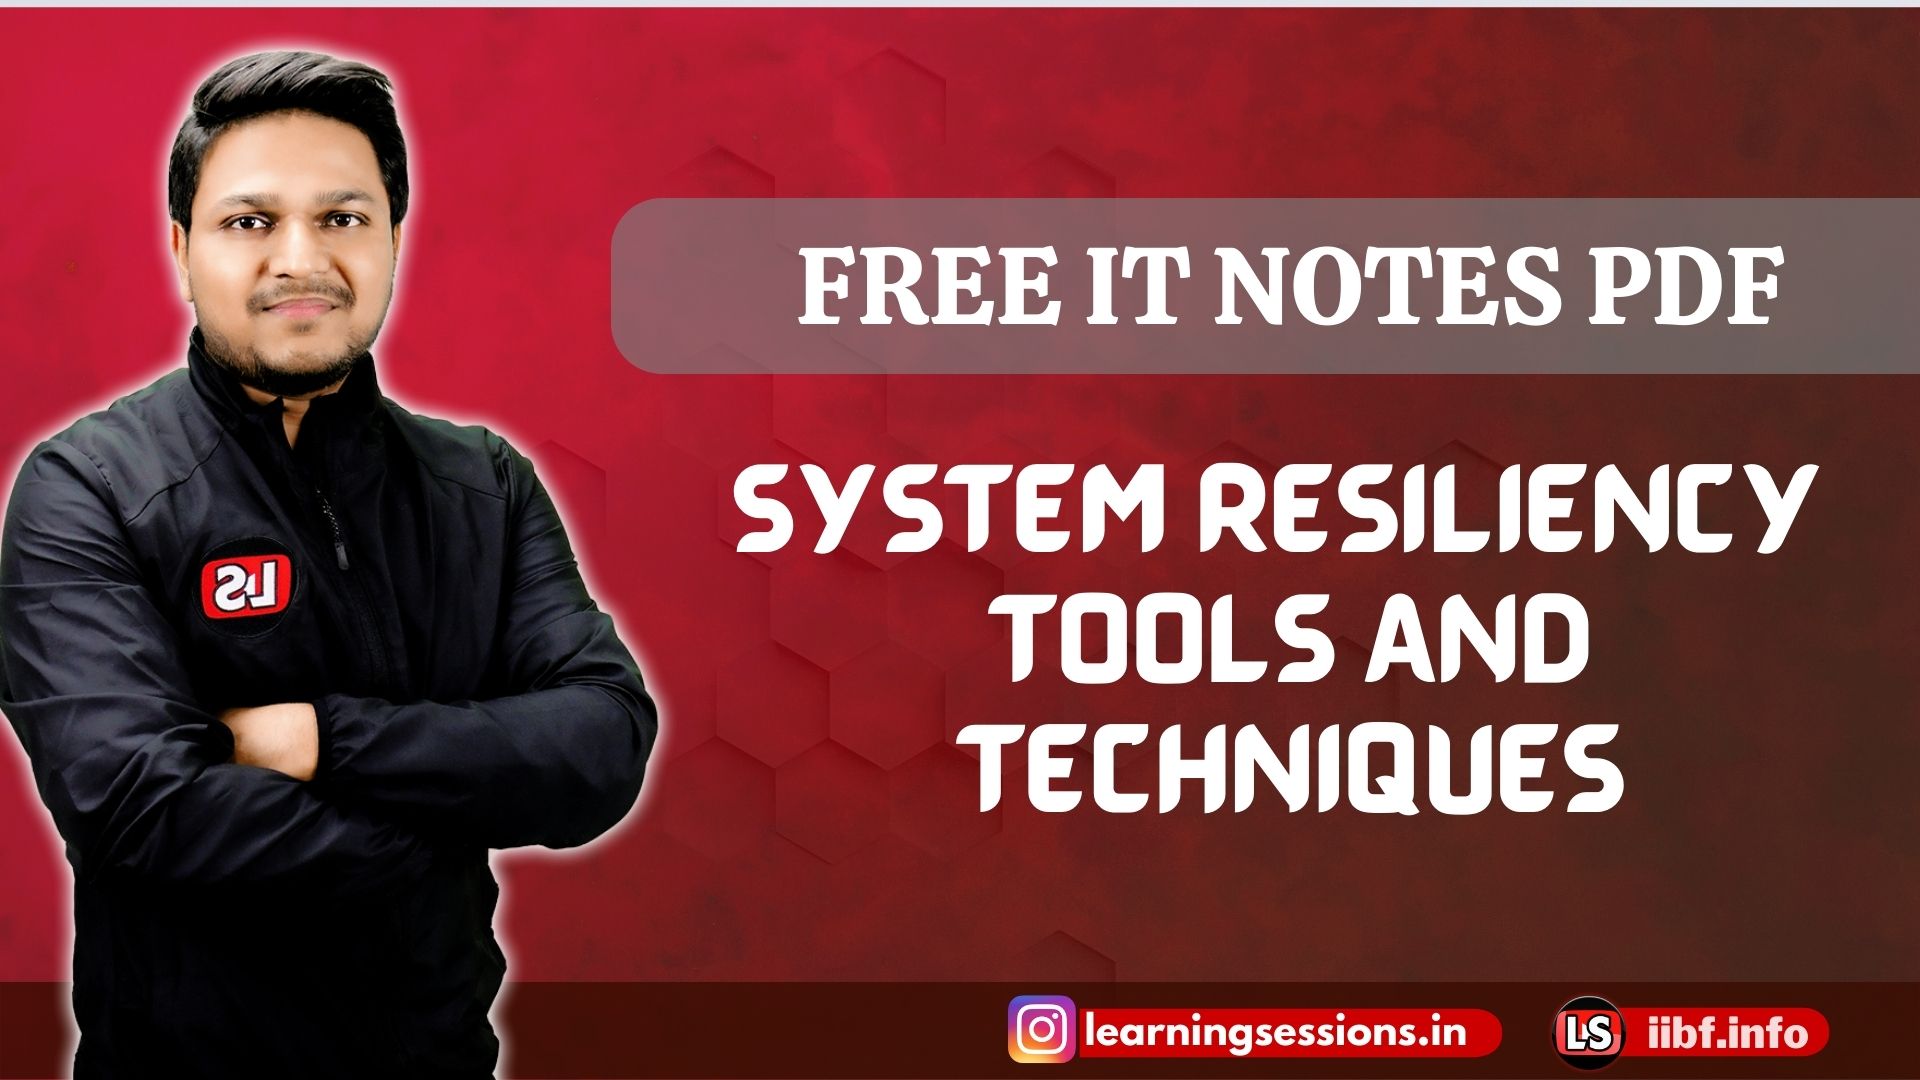 System Resiliency Tools and Techniques | Free CAIIB IT Notes pdf